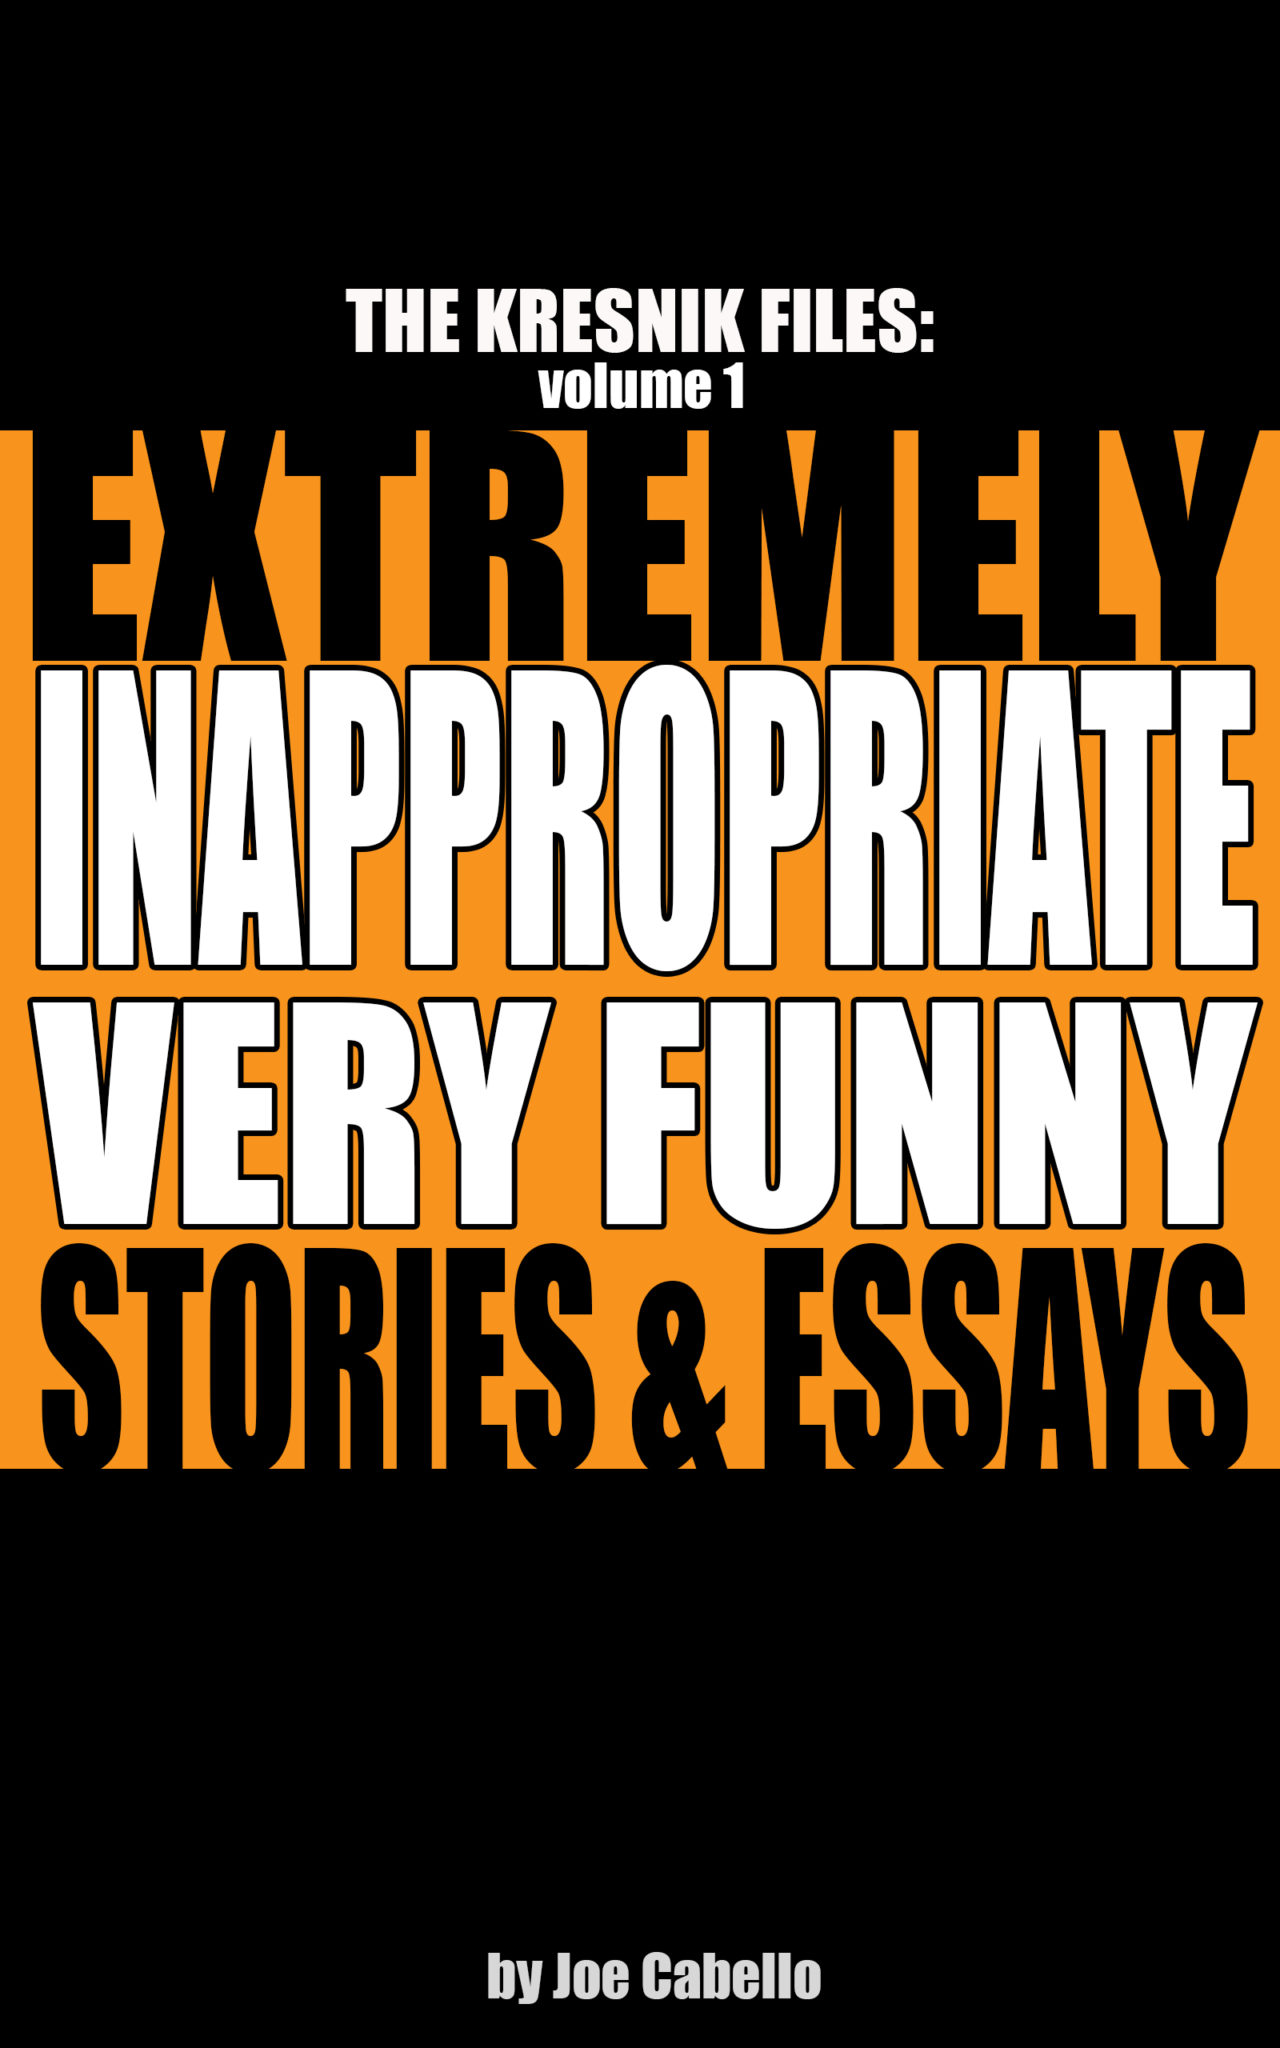 FREE: The Kresnik Files: Extremely Inappropriate, Very Funny Stories & Essays by Joe Cabello